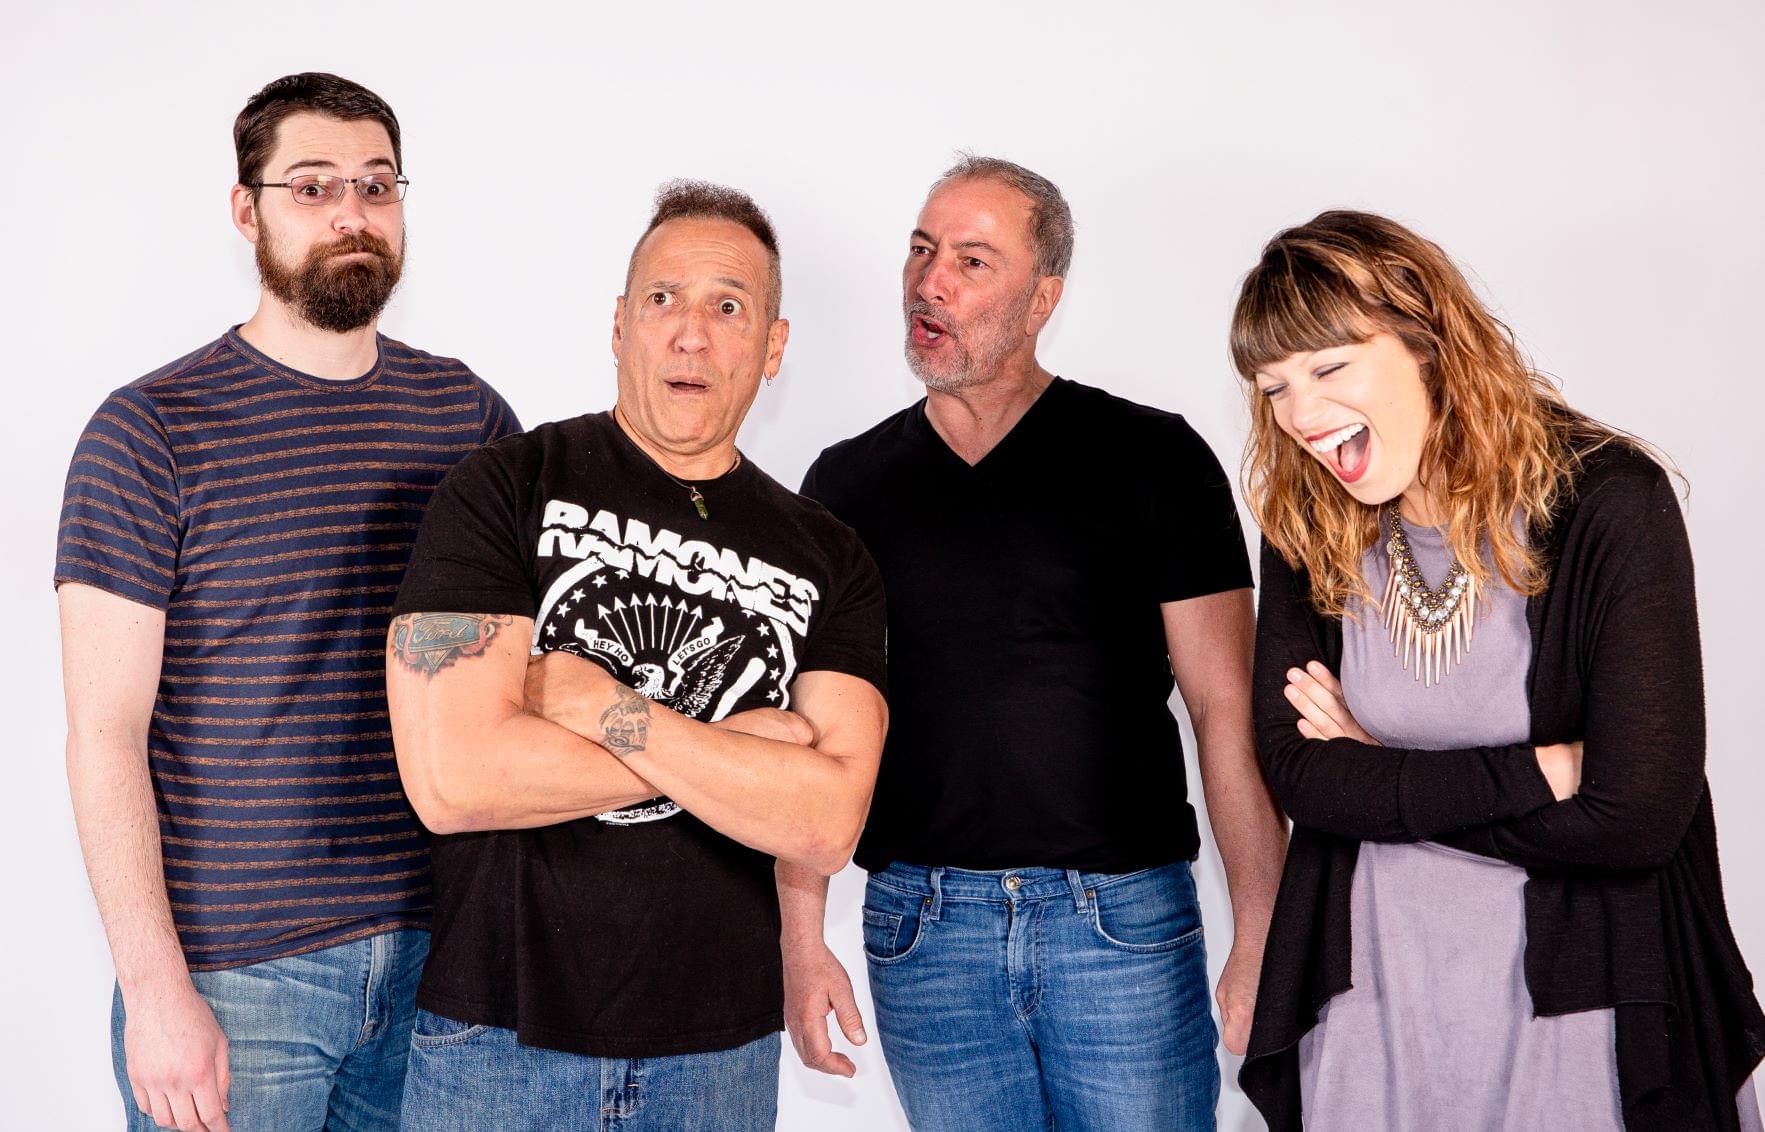 PODCAST – Thursday, June 27: Gilbert Gottfried, Concert Stories, And Ashley Goes Off The Rails